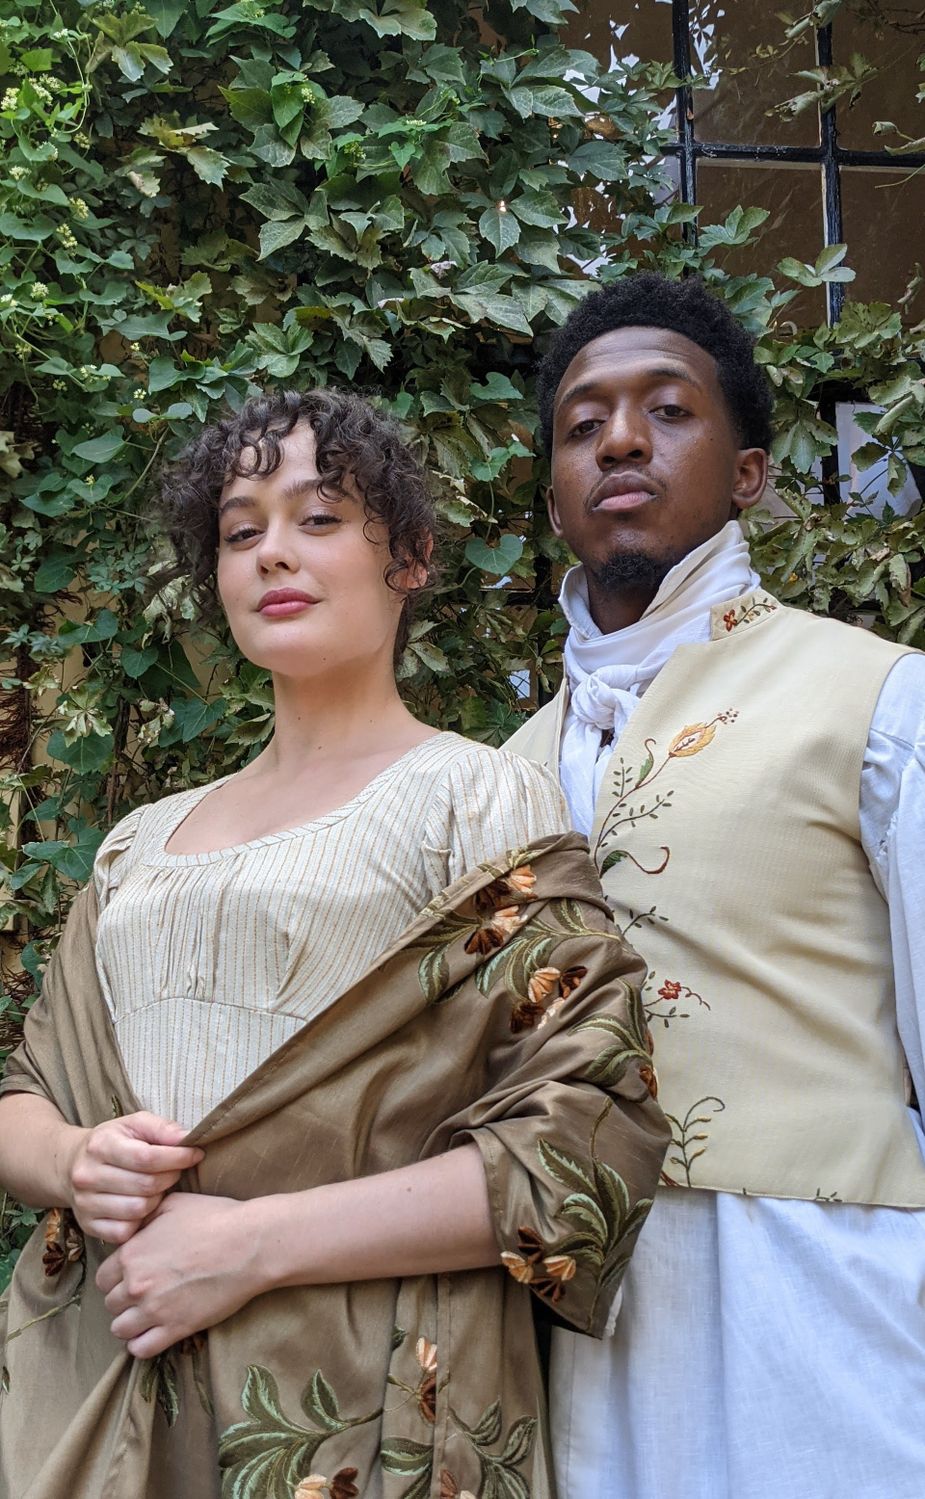 Oklahoma Shakespeare in the Park presents "Pride & Prejudice" starring Bianca Bulgarelli as Elizabeth Bennet and Kamron McClure as Mr. Darcy. Photo courtesy Oklahoma Shakespeare in the Park.